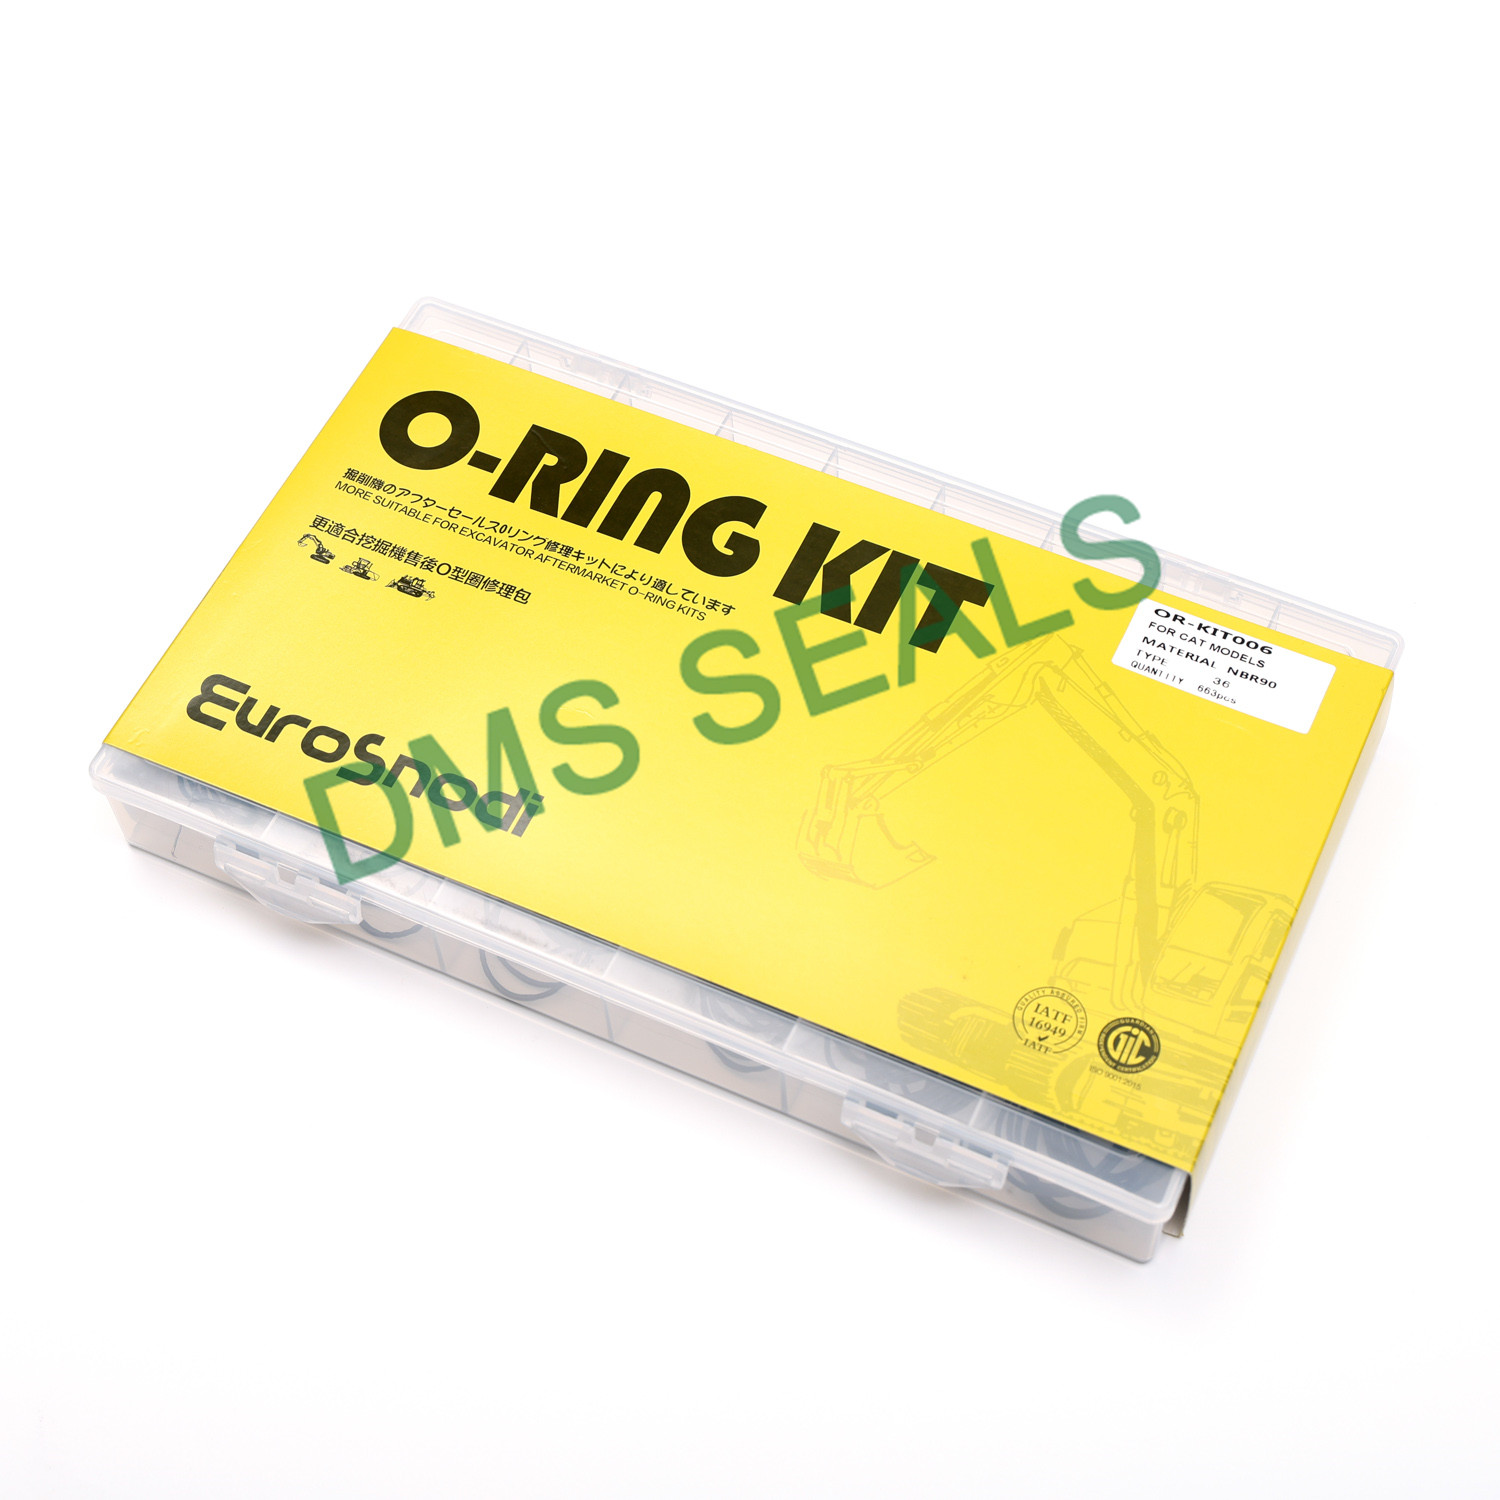 DMS Seals nice quality o ring 21 factory price For seal-2